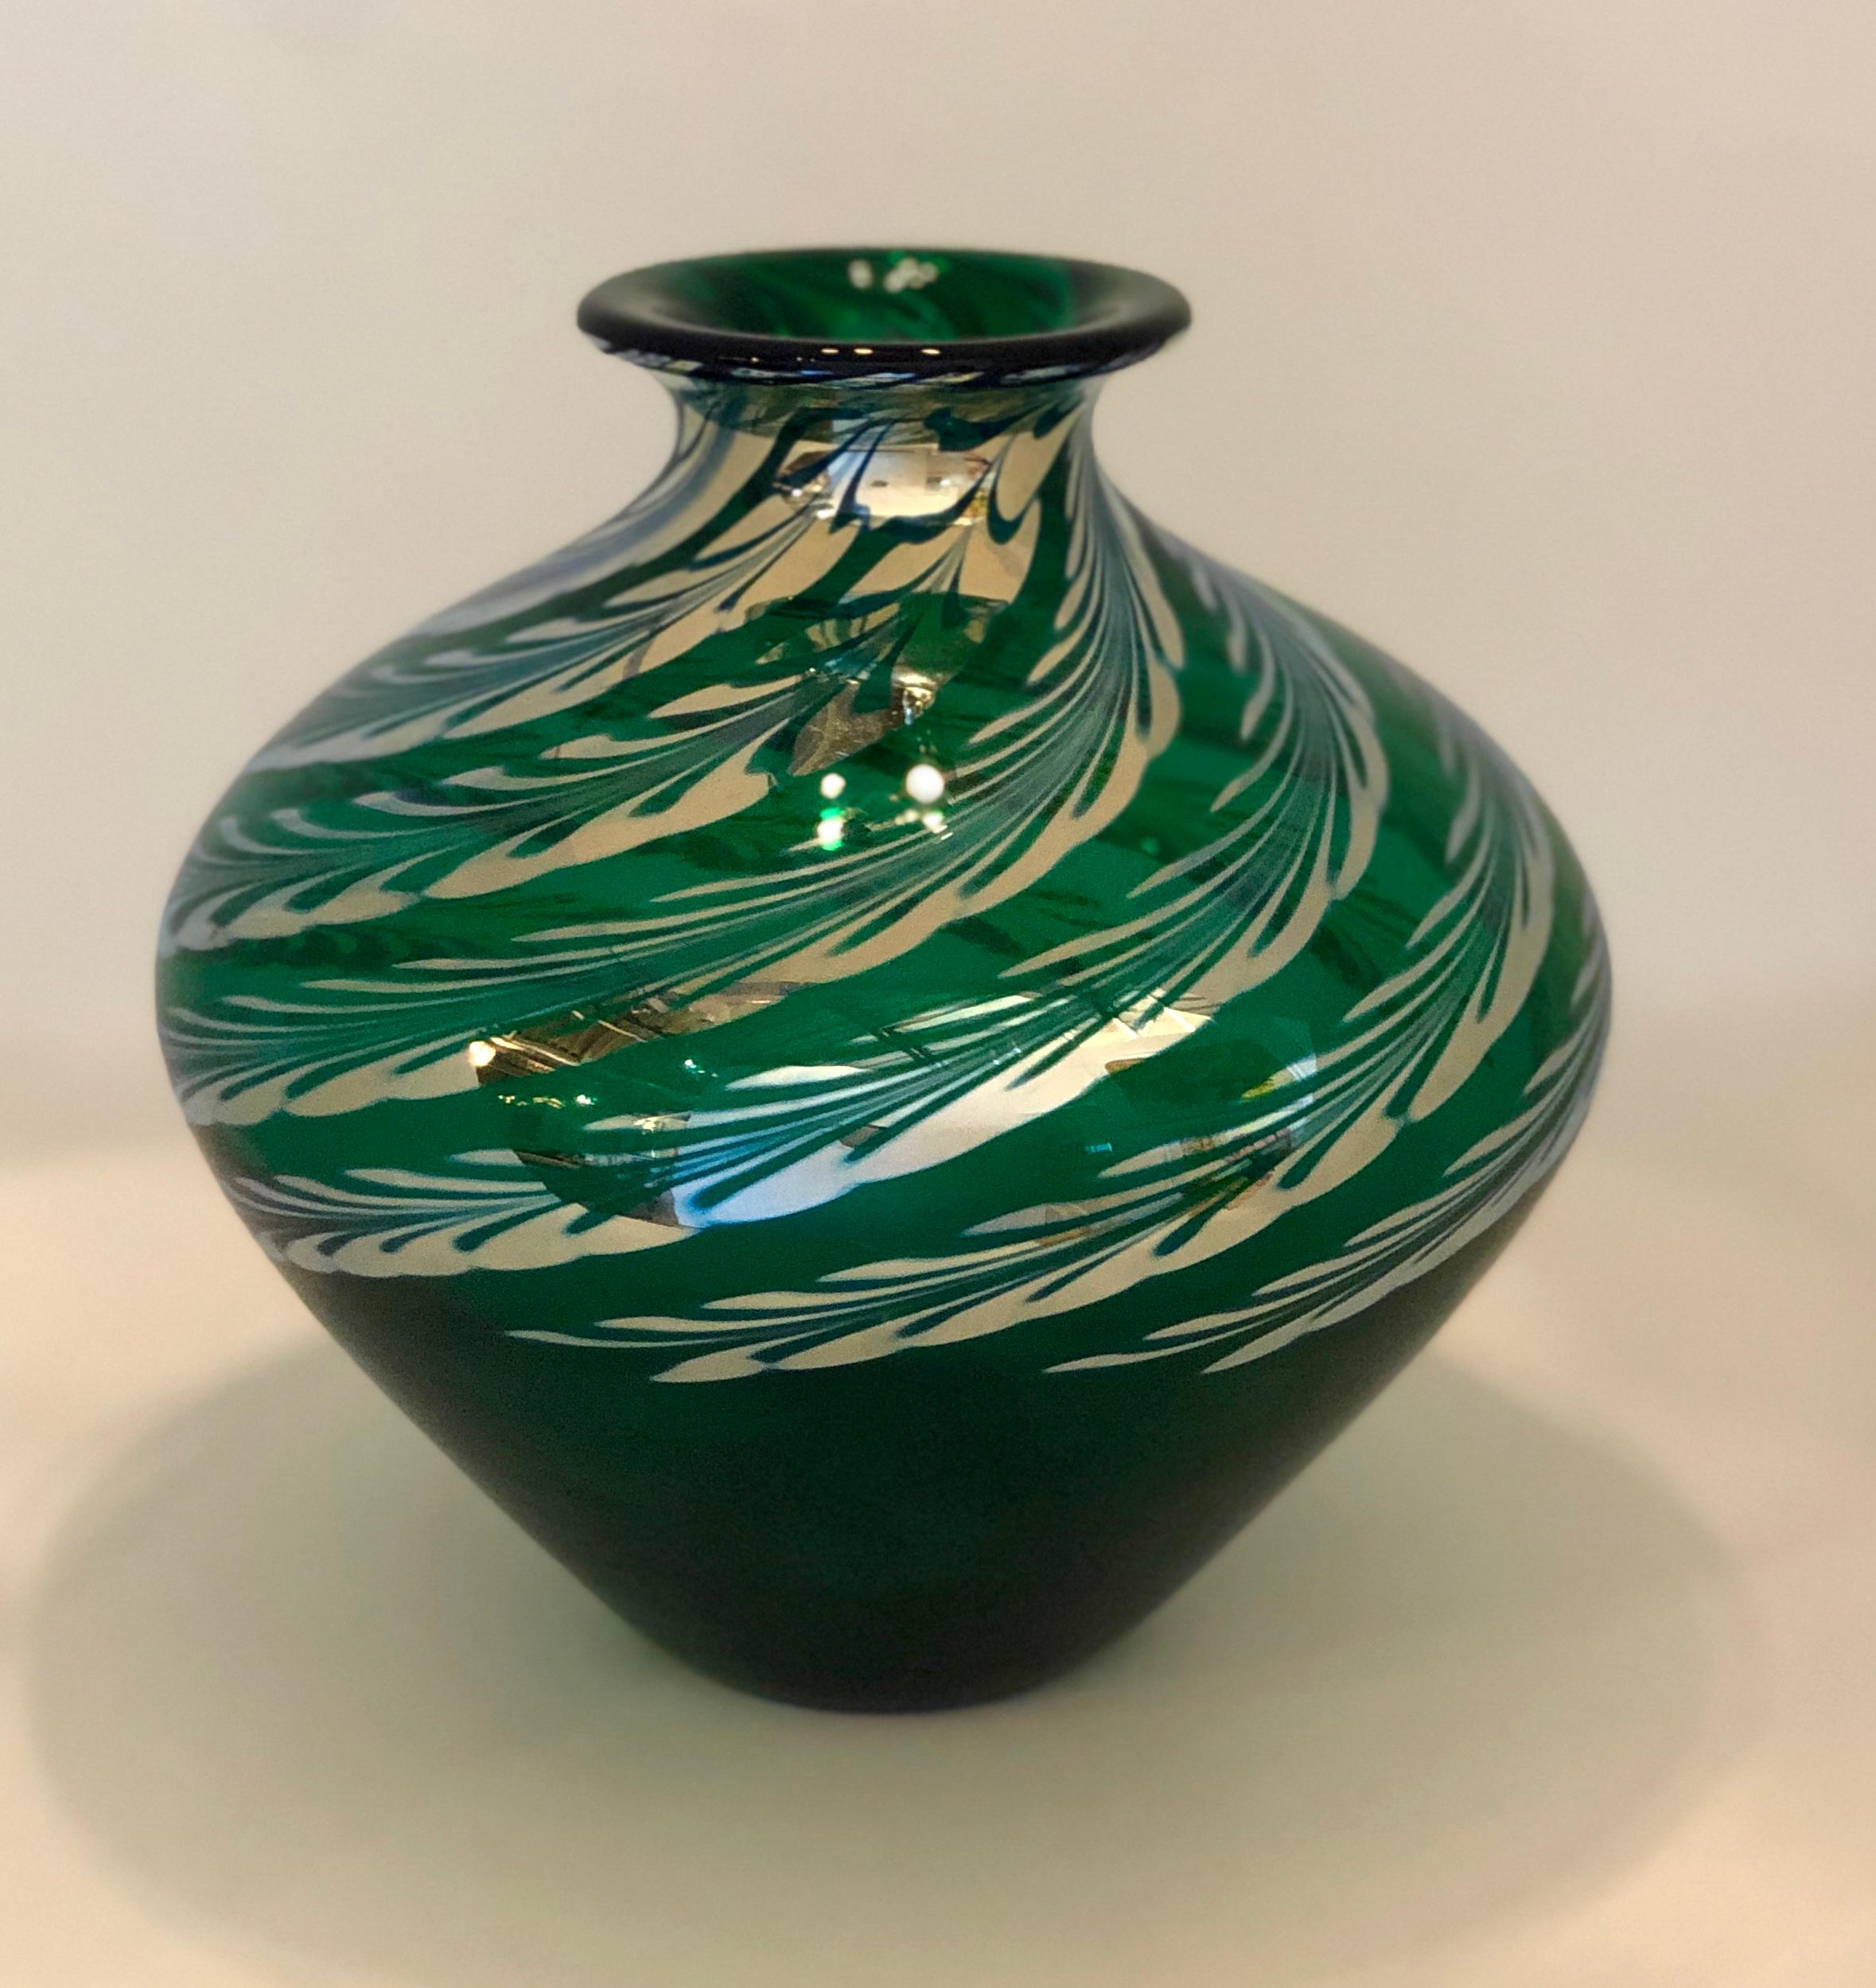 The offered glass art vase is a Mid-Century Modern baluster form iridescent green vase with silver feather swirl decoration and etched signature of Steven Correia on the bottom, numbered 